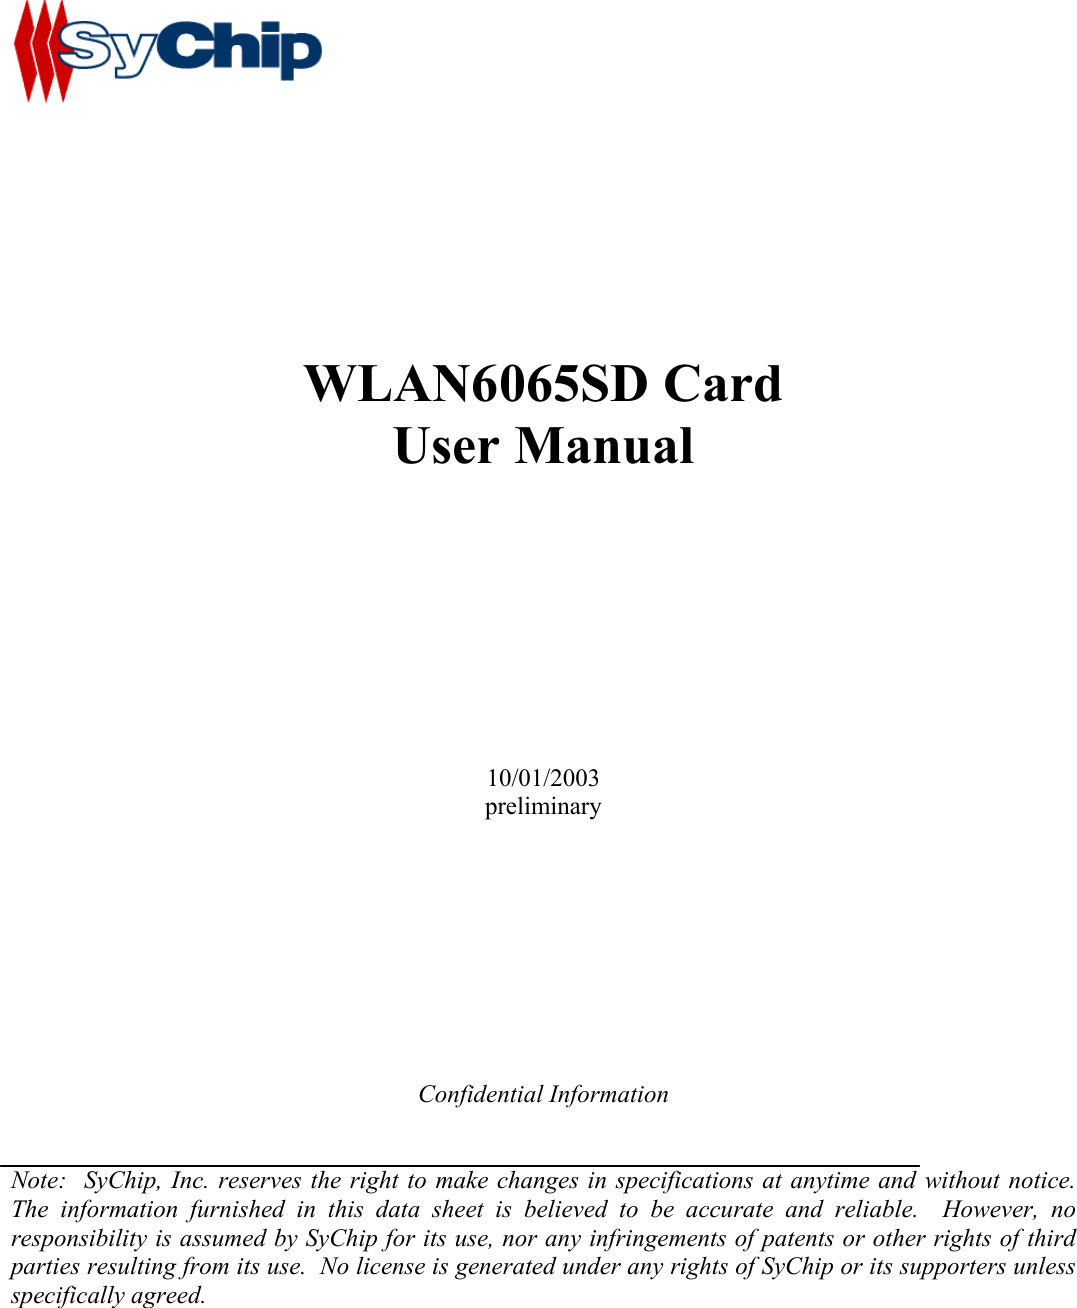               WLAN6065SD Card User Manual           10/01/2003 preliminary          Confidential Information   Note:  SyChip, Inc. reserves the right to make changes in specifications at anytime and without notice.  The information furnished in this data sheet is believed to be accurate and reliable.  However, no responsibility is assumed by SyChip for its use, nor any infringements of patents or other rights of third parties resulting from its use.  No license is generated under any rights of SyChip or its supporters unless specifically agreed.       